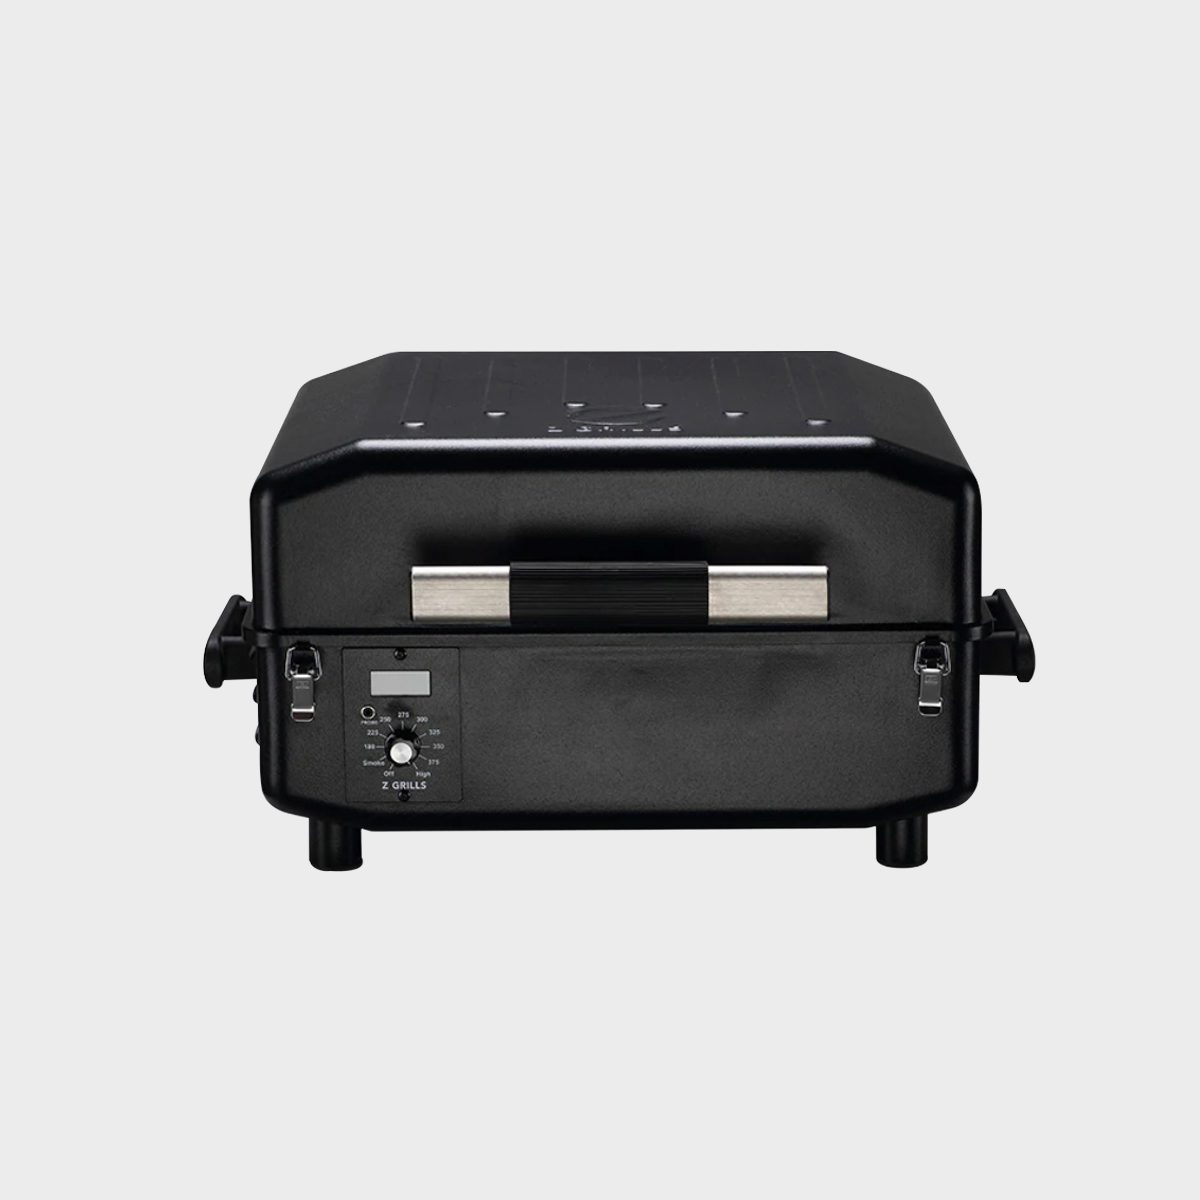 Z Grills Wood Pellet Grill And Smoker Ecomm Zgrills.com